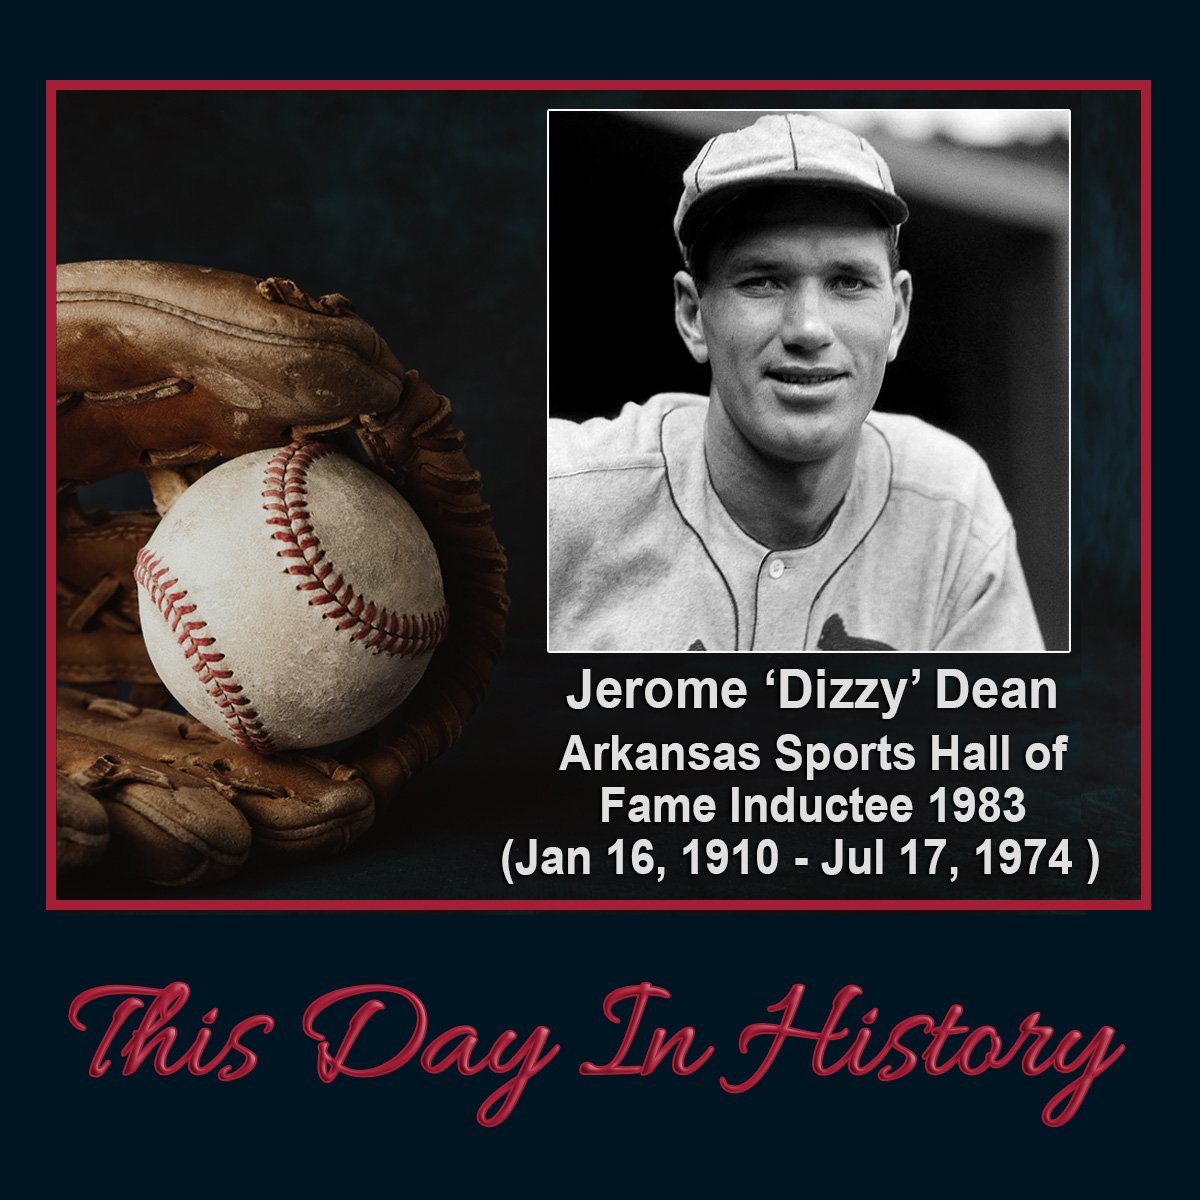 Dean, a member of baseball’s Hall of Fame, won 30 games for the World Champion St. Louis Cardinals in 1934 and was the league’s MVP. Dean led the National league in shutouts (1932, 1934) and in strikeouts (1932-1935). Dean was born in Lucas, near Booneville. ASHOF in 1983.